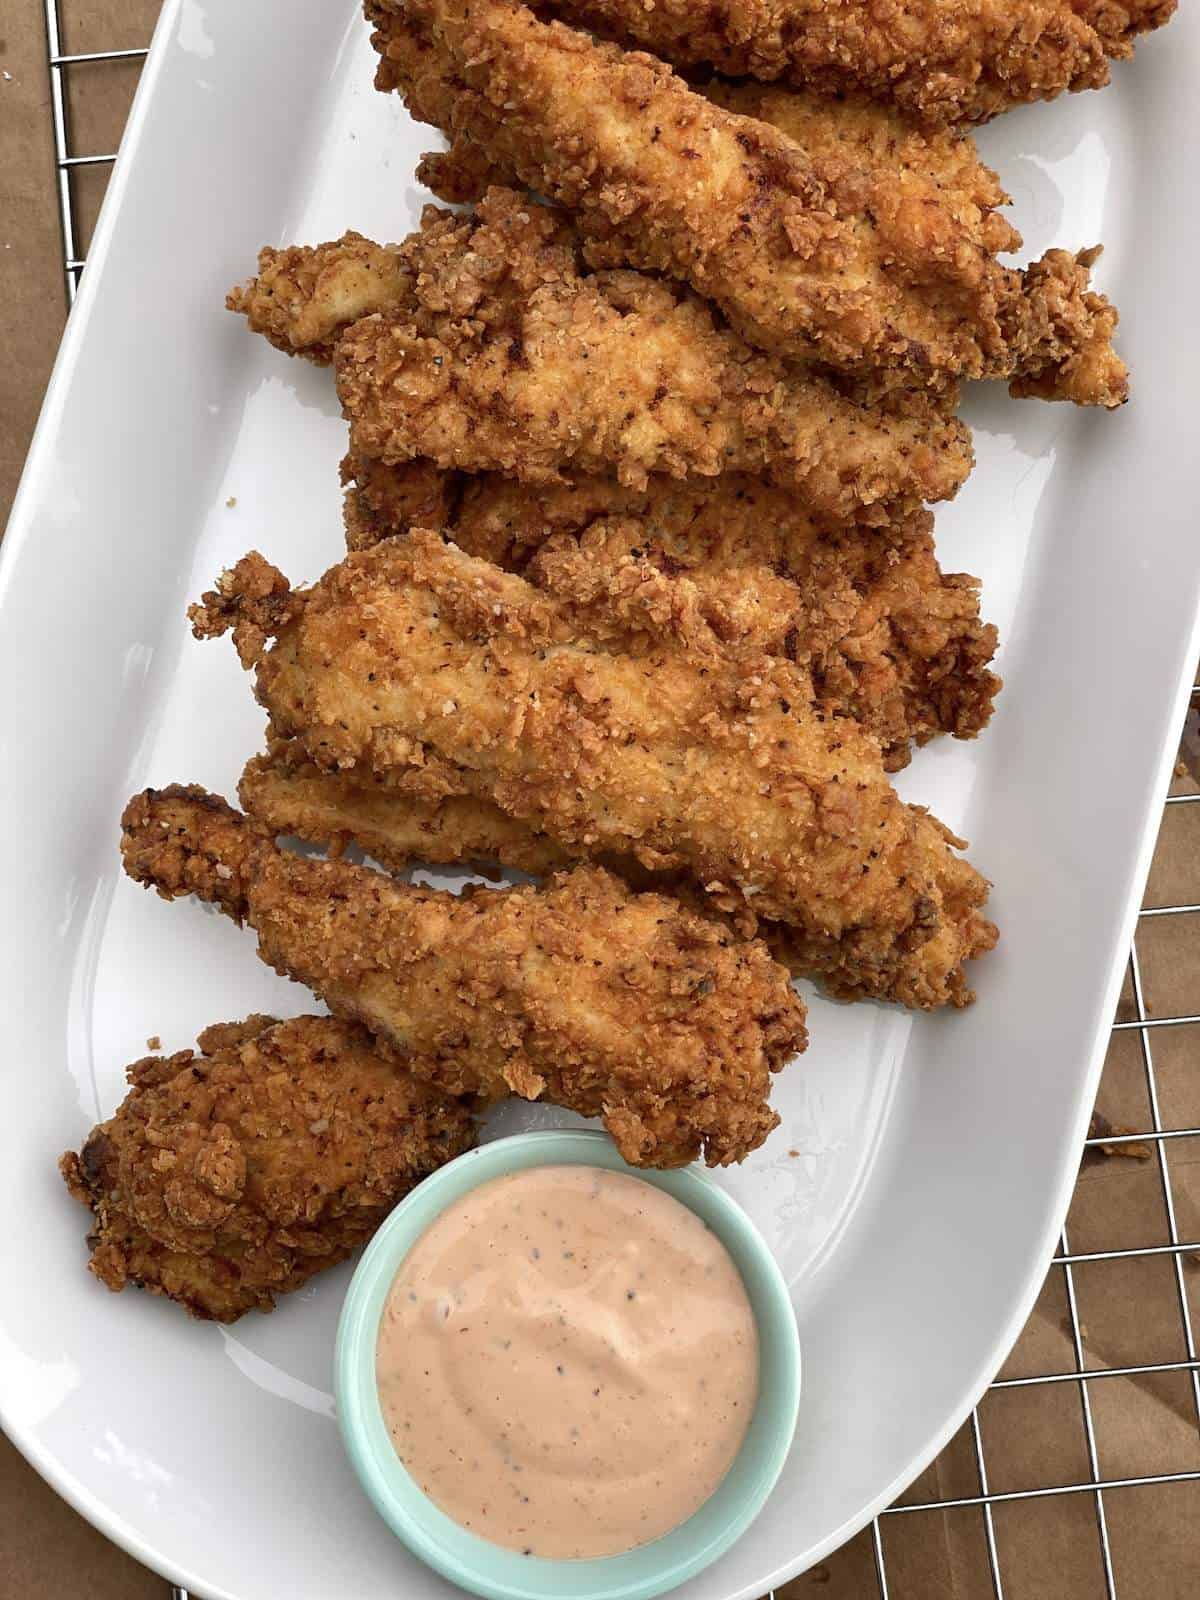 Golden fried chicken on a plate with Cane's dipping sauce.